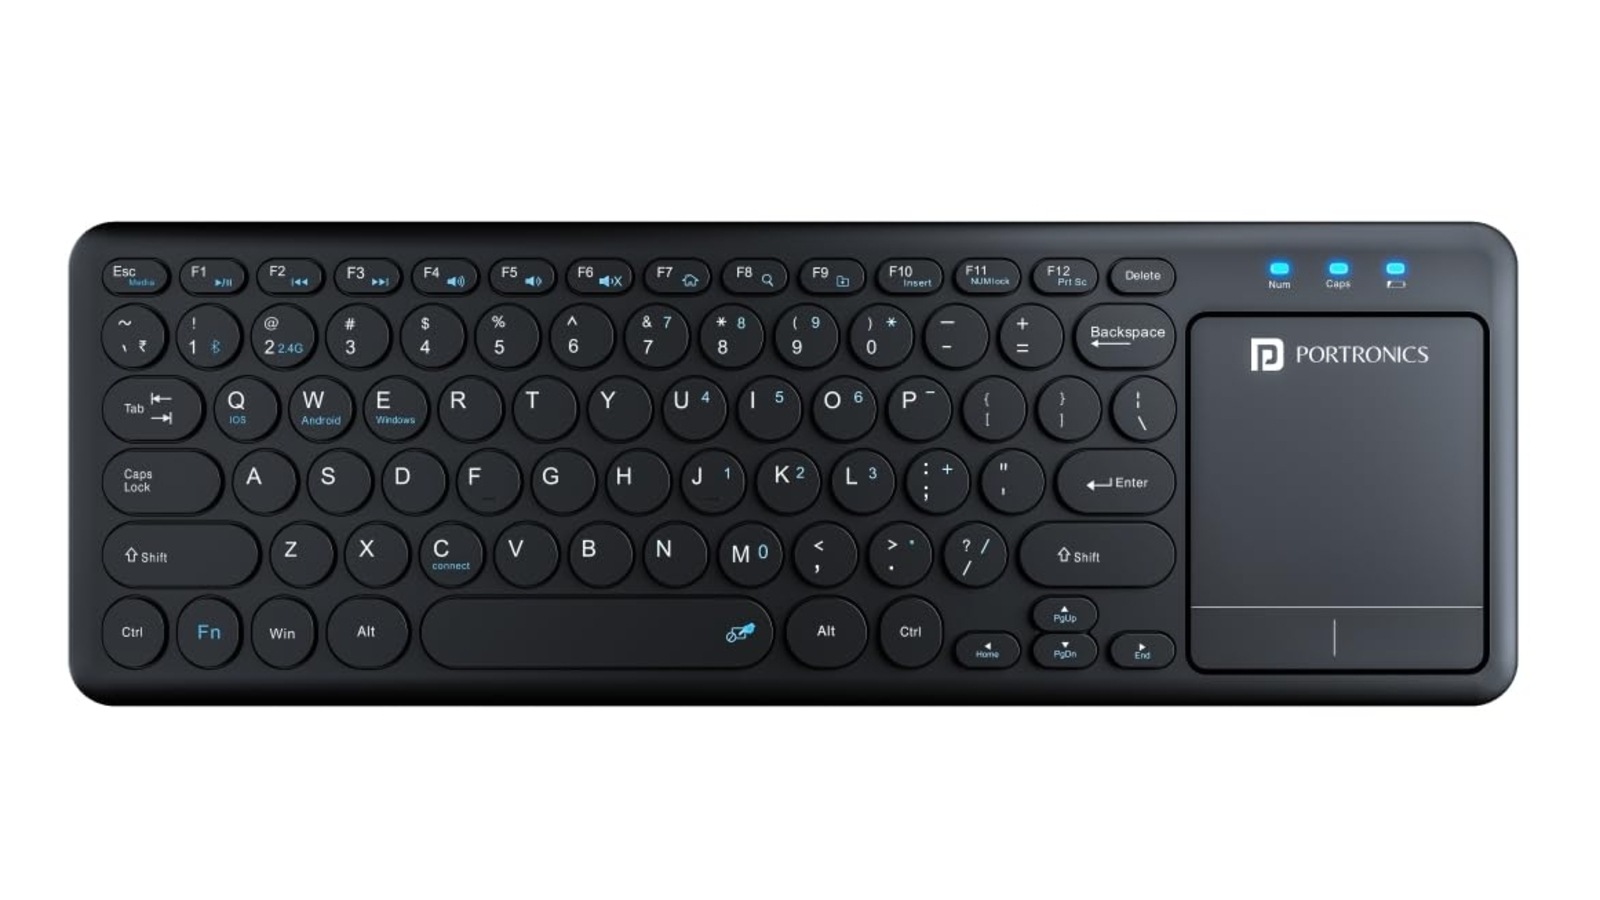 Top 10 wireless keyboards: Features and performance